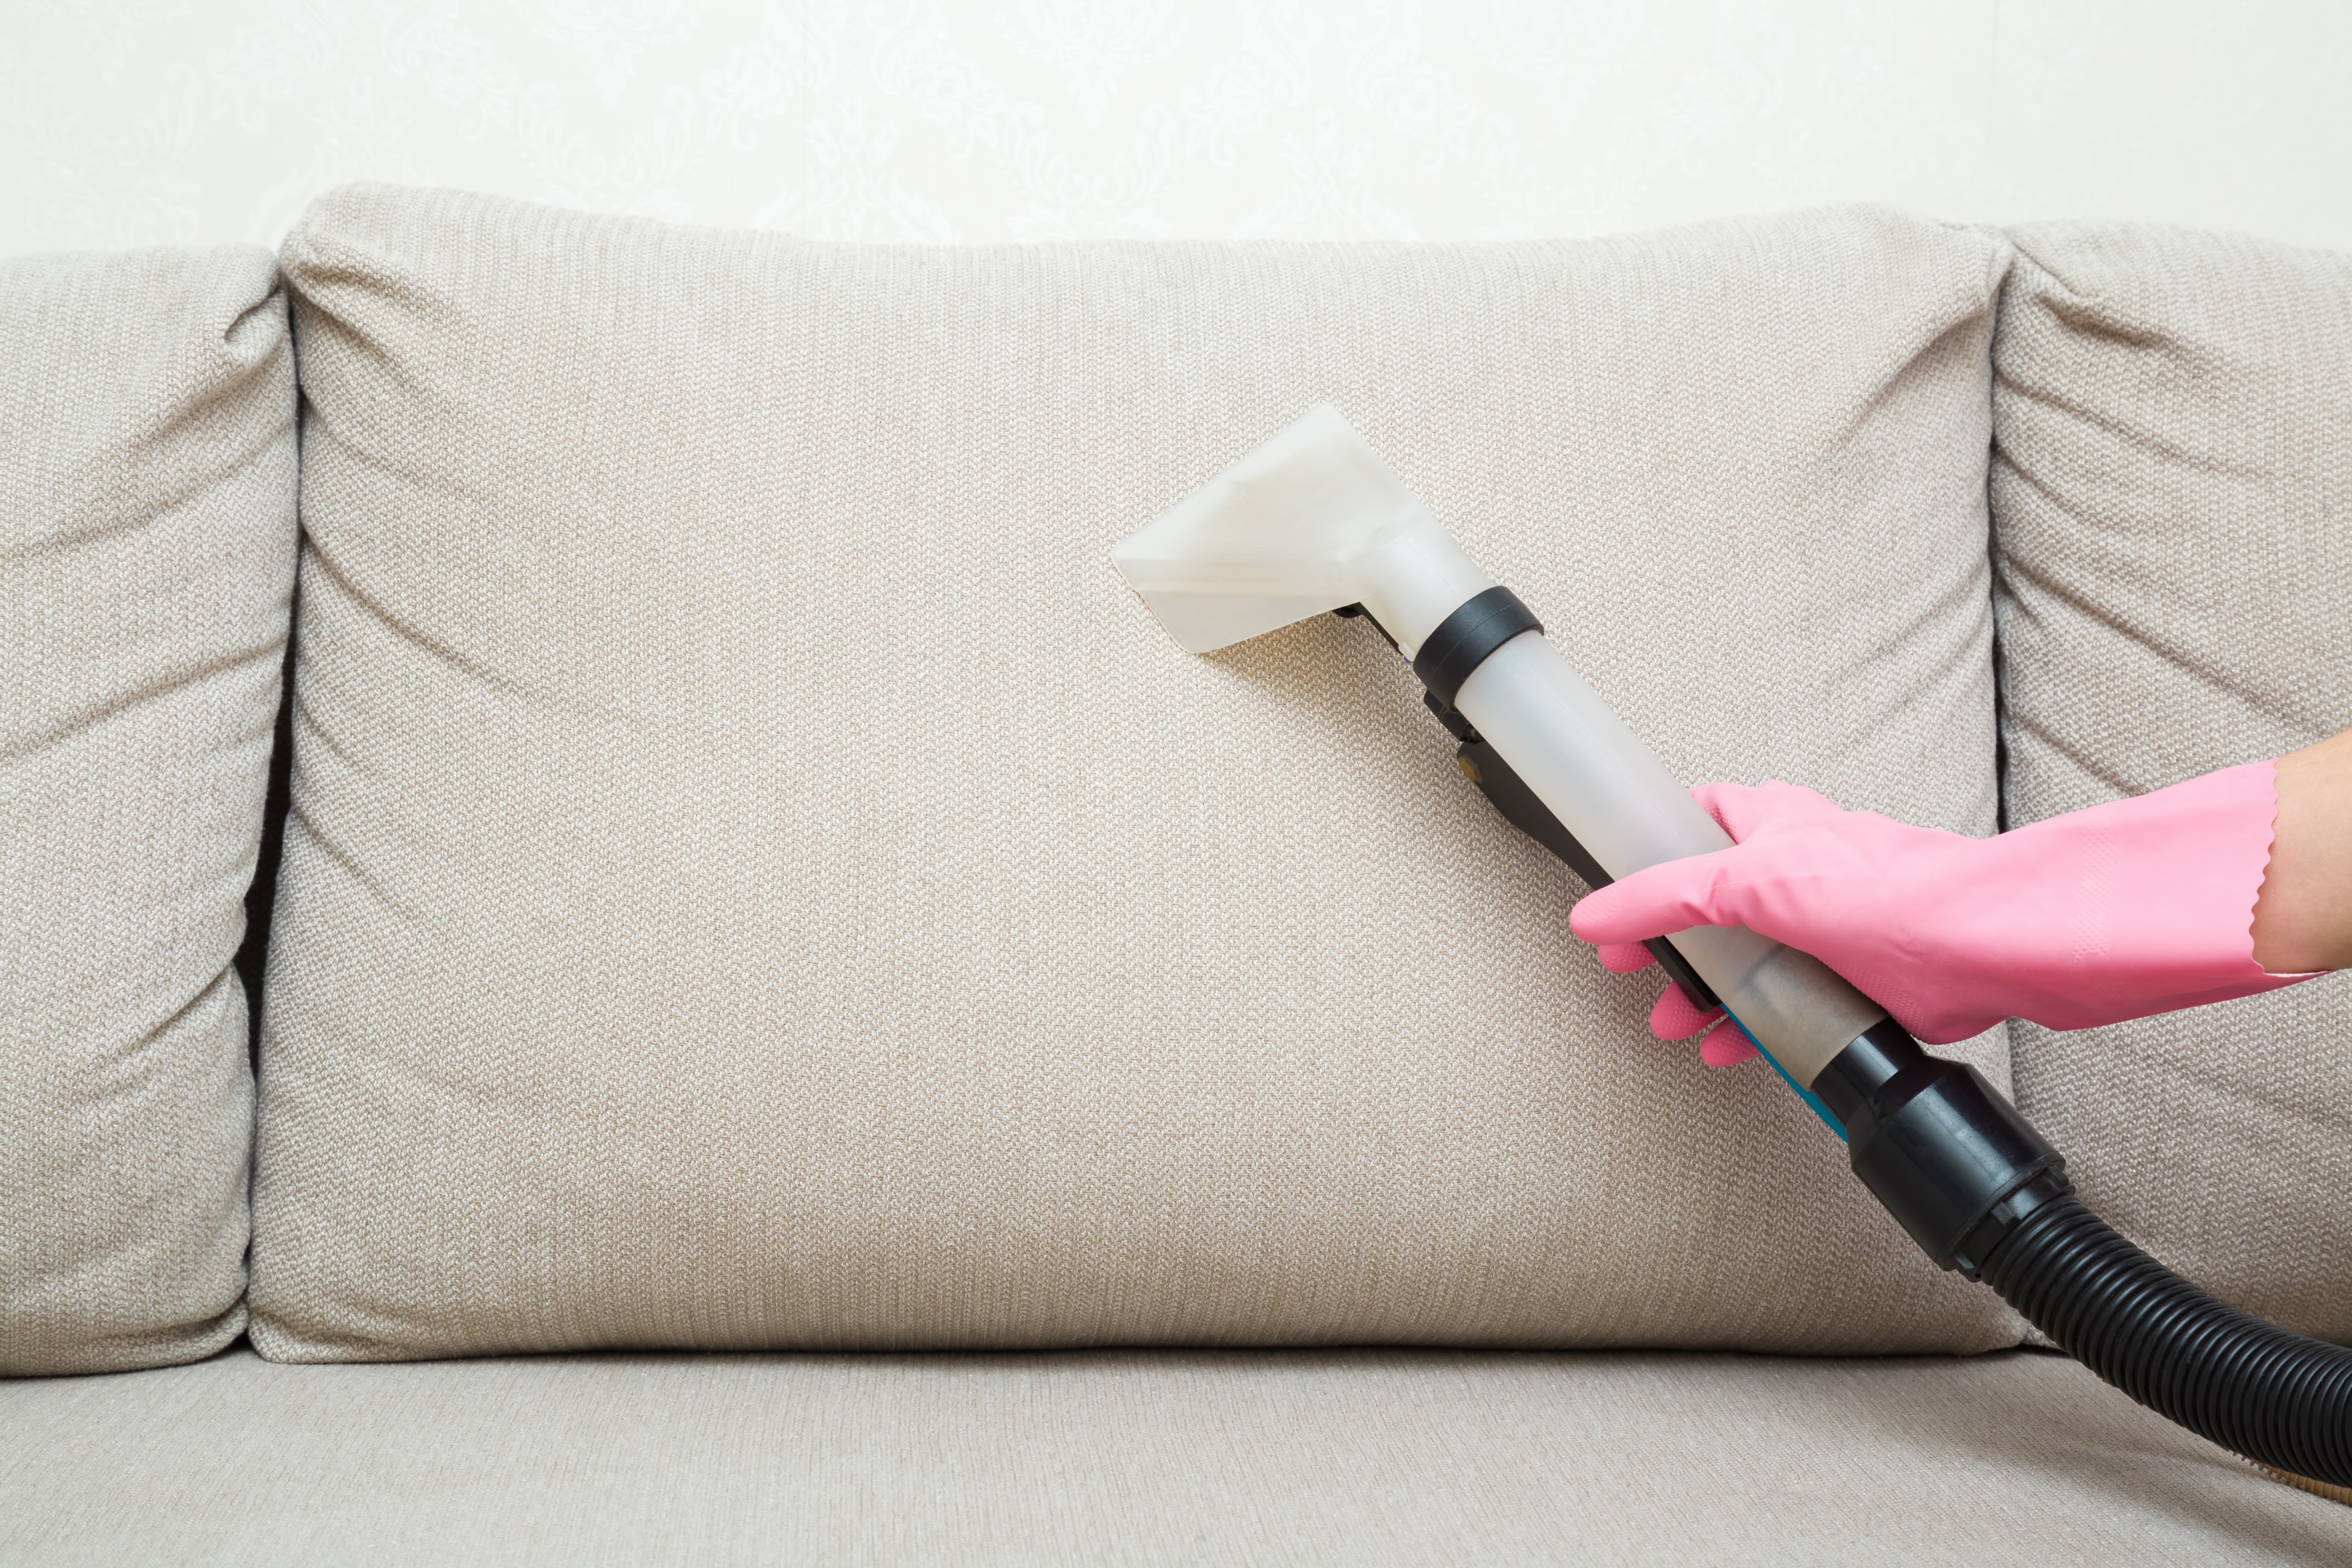 A cleaner vacuuming a couch | Source: Shutterstock